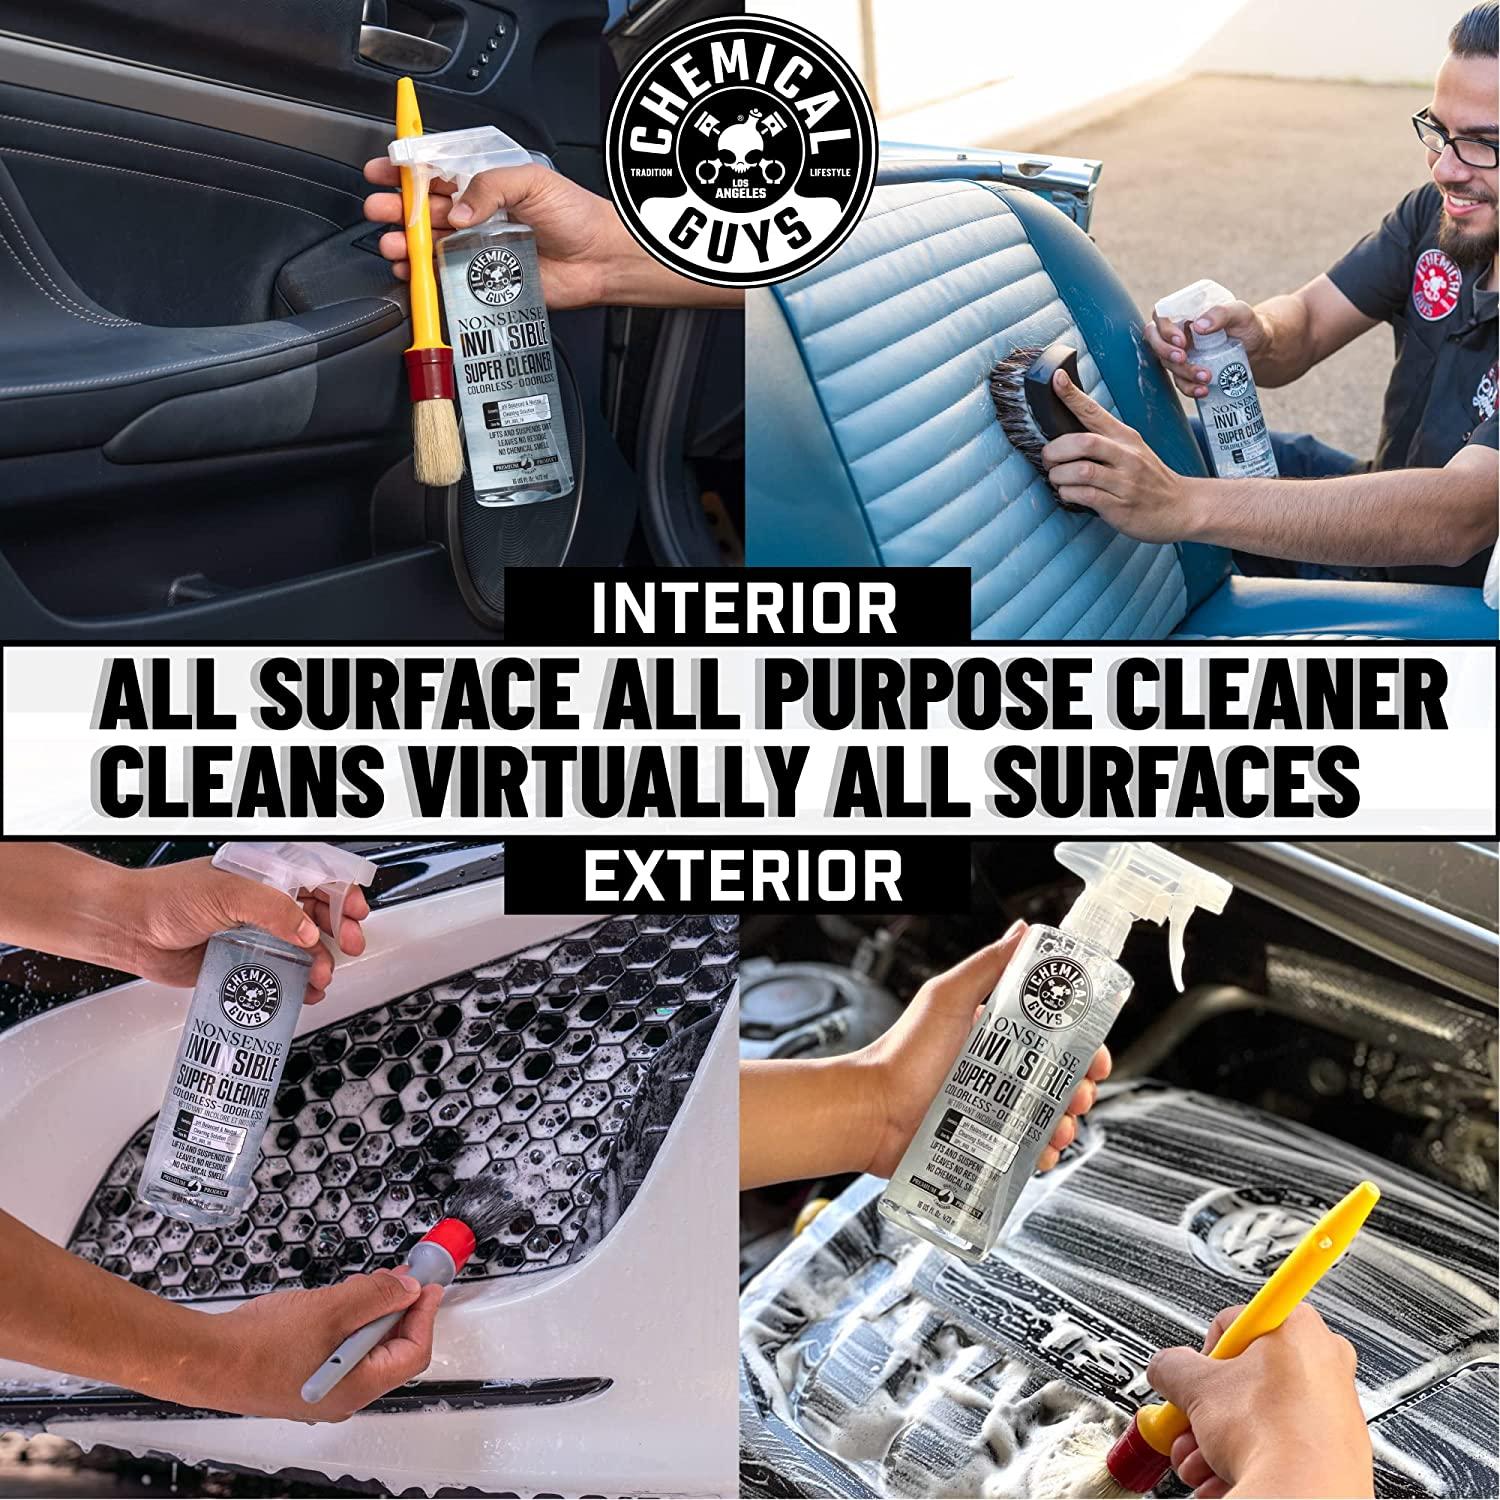 Erase years of dirt and grime with Nonsense All Purpose Cleaner